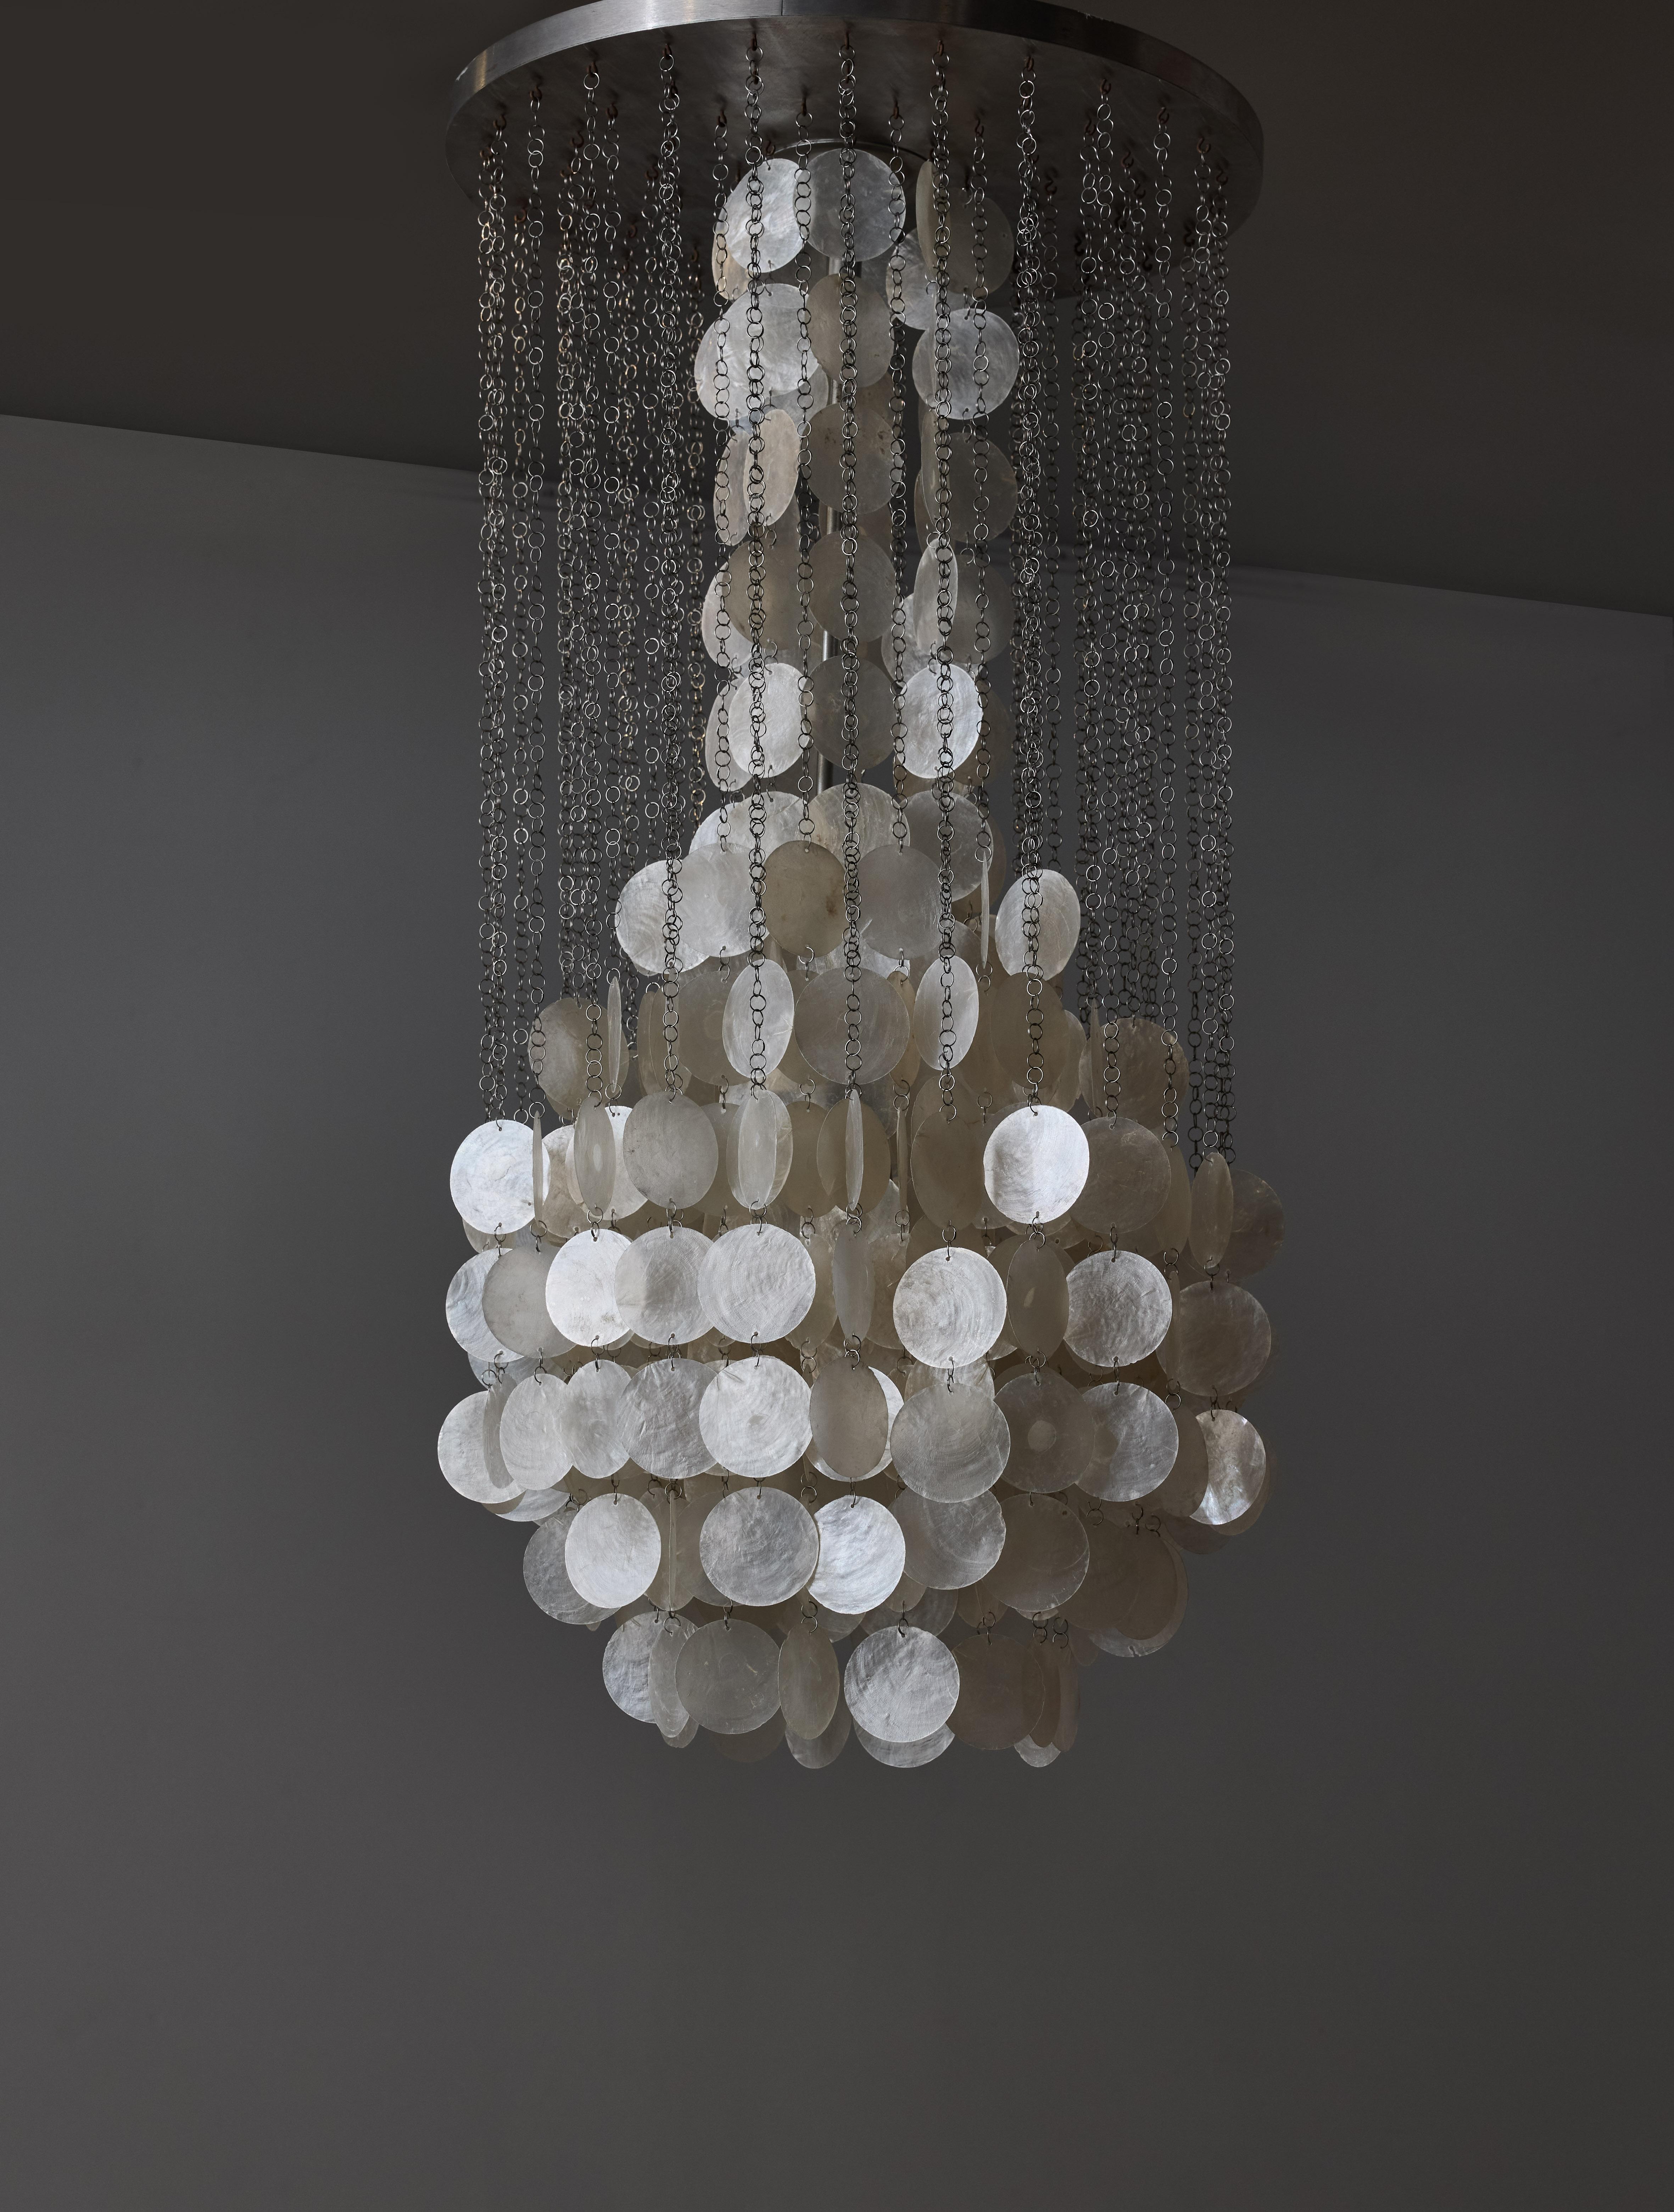 Beautiful chandelier made of a round aluminium ceiling plate, from which fall tens of mother of pearl discs, linked amongst them with adjustable chains.

The sources of light are hidden in the central 